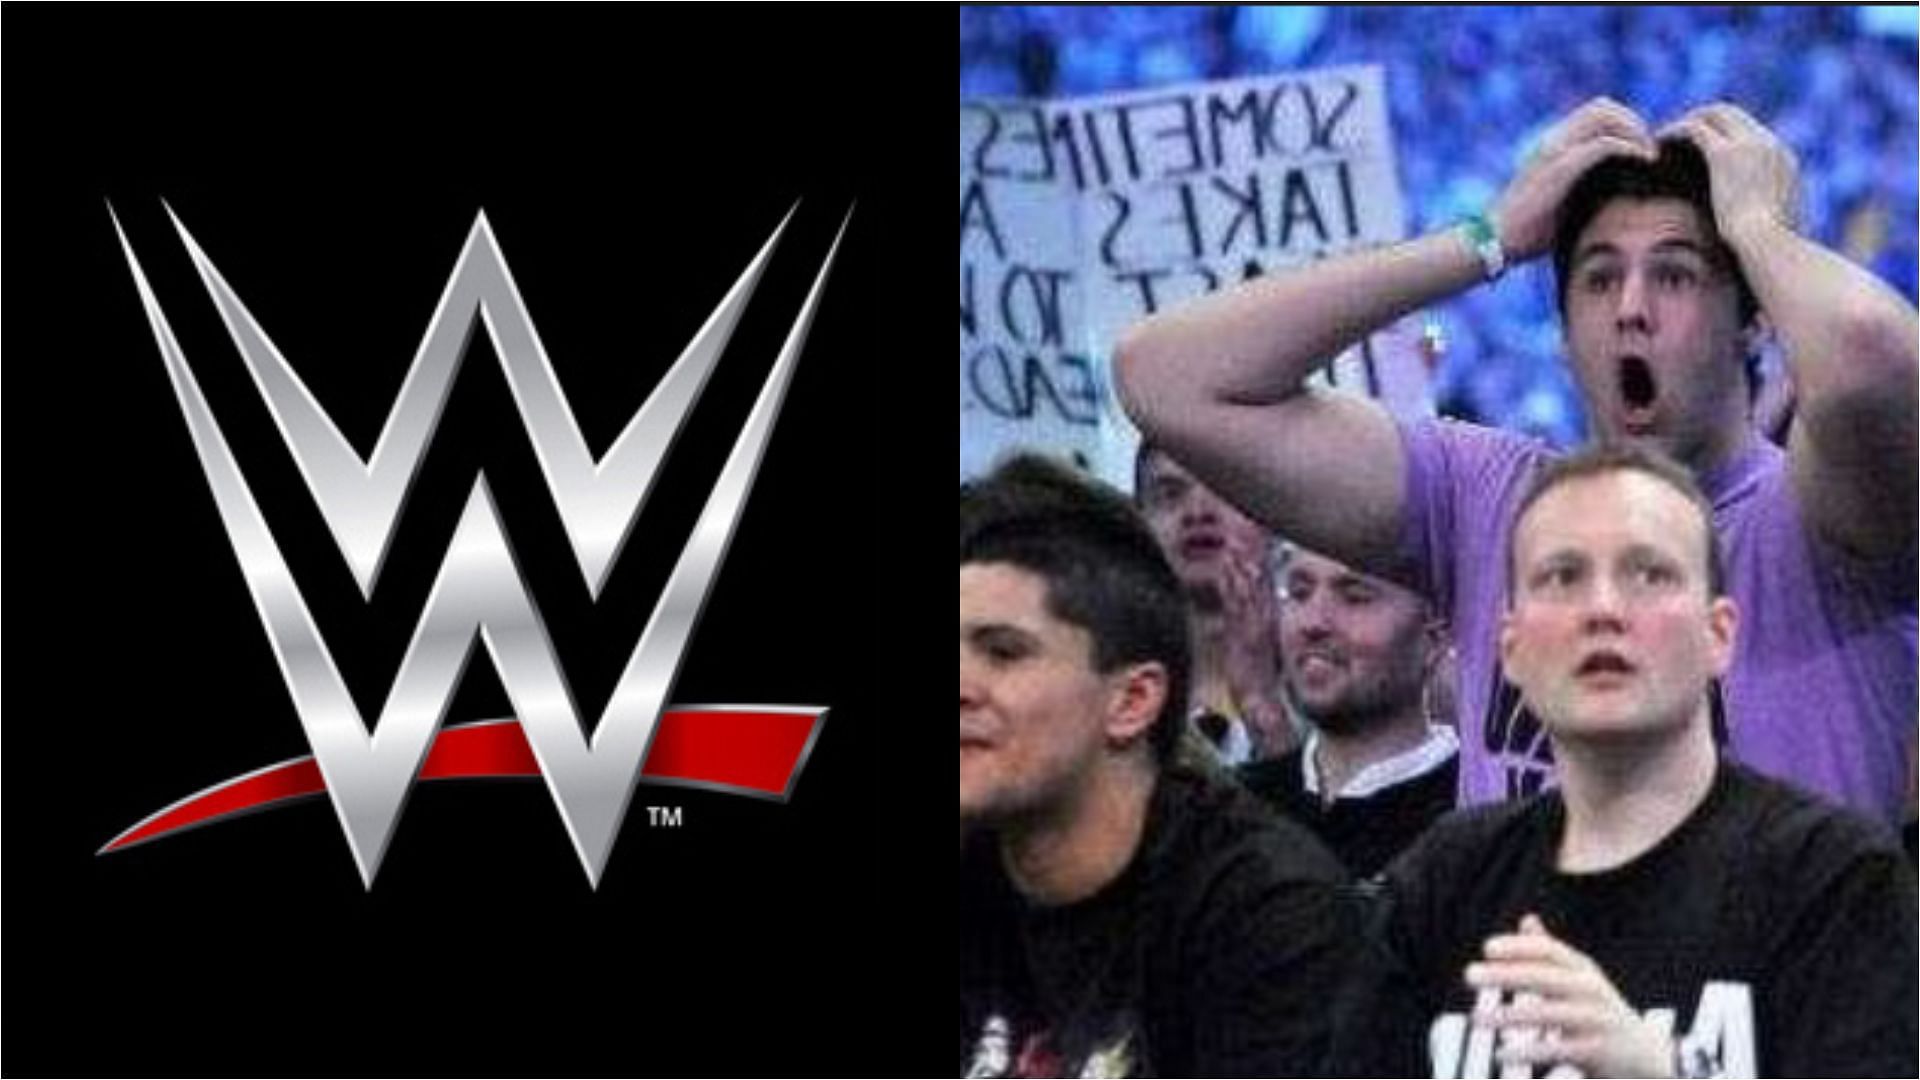 WWE fans saw something unexpected this week.